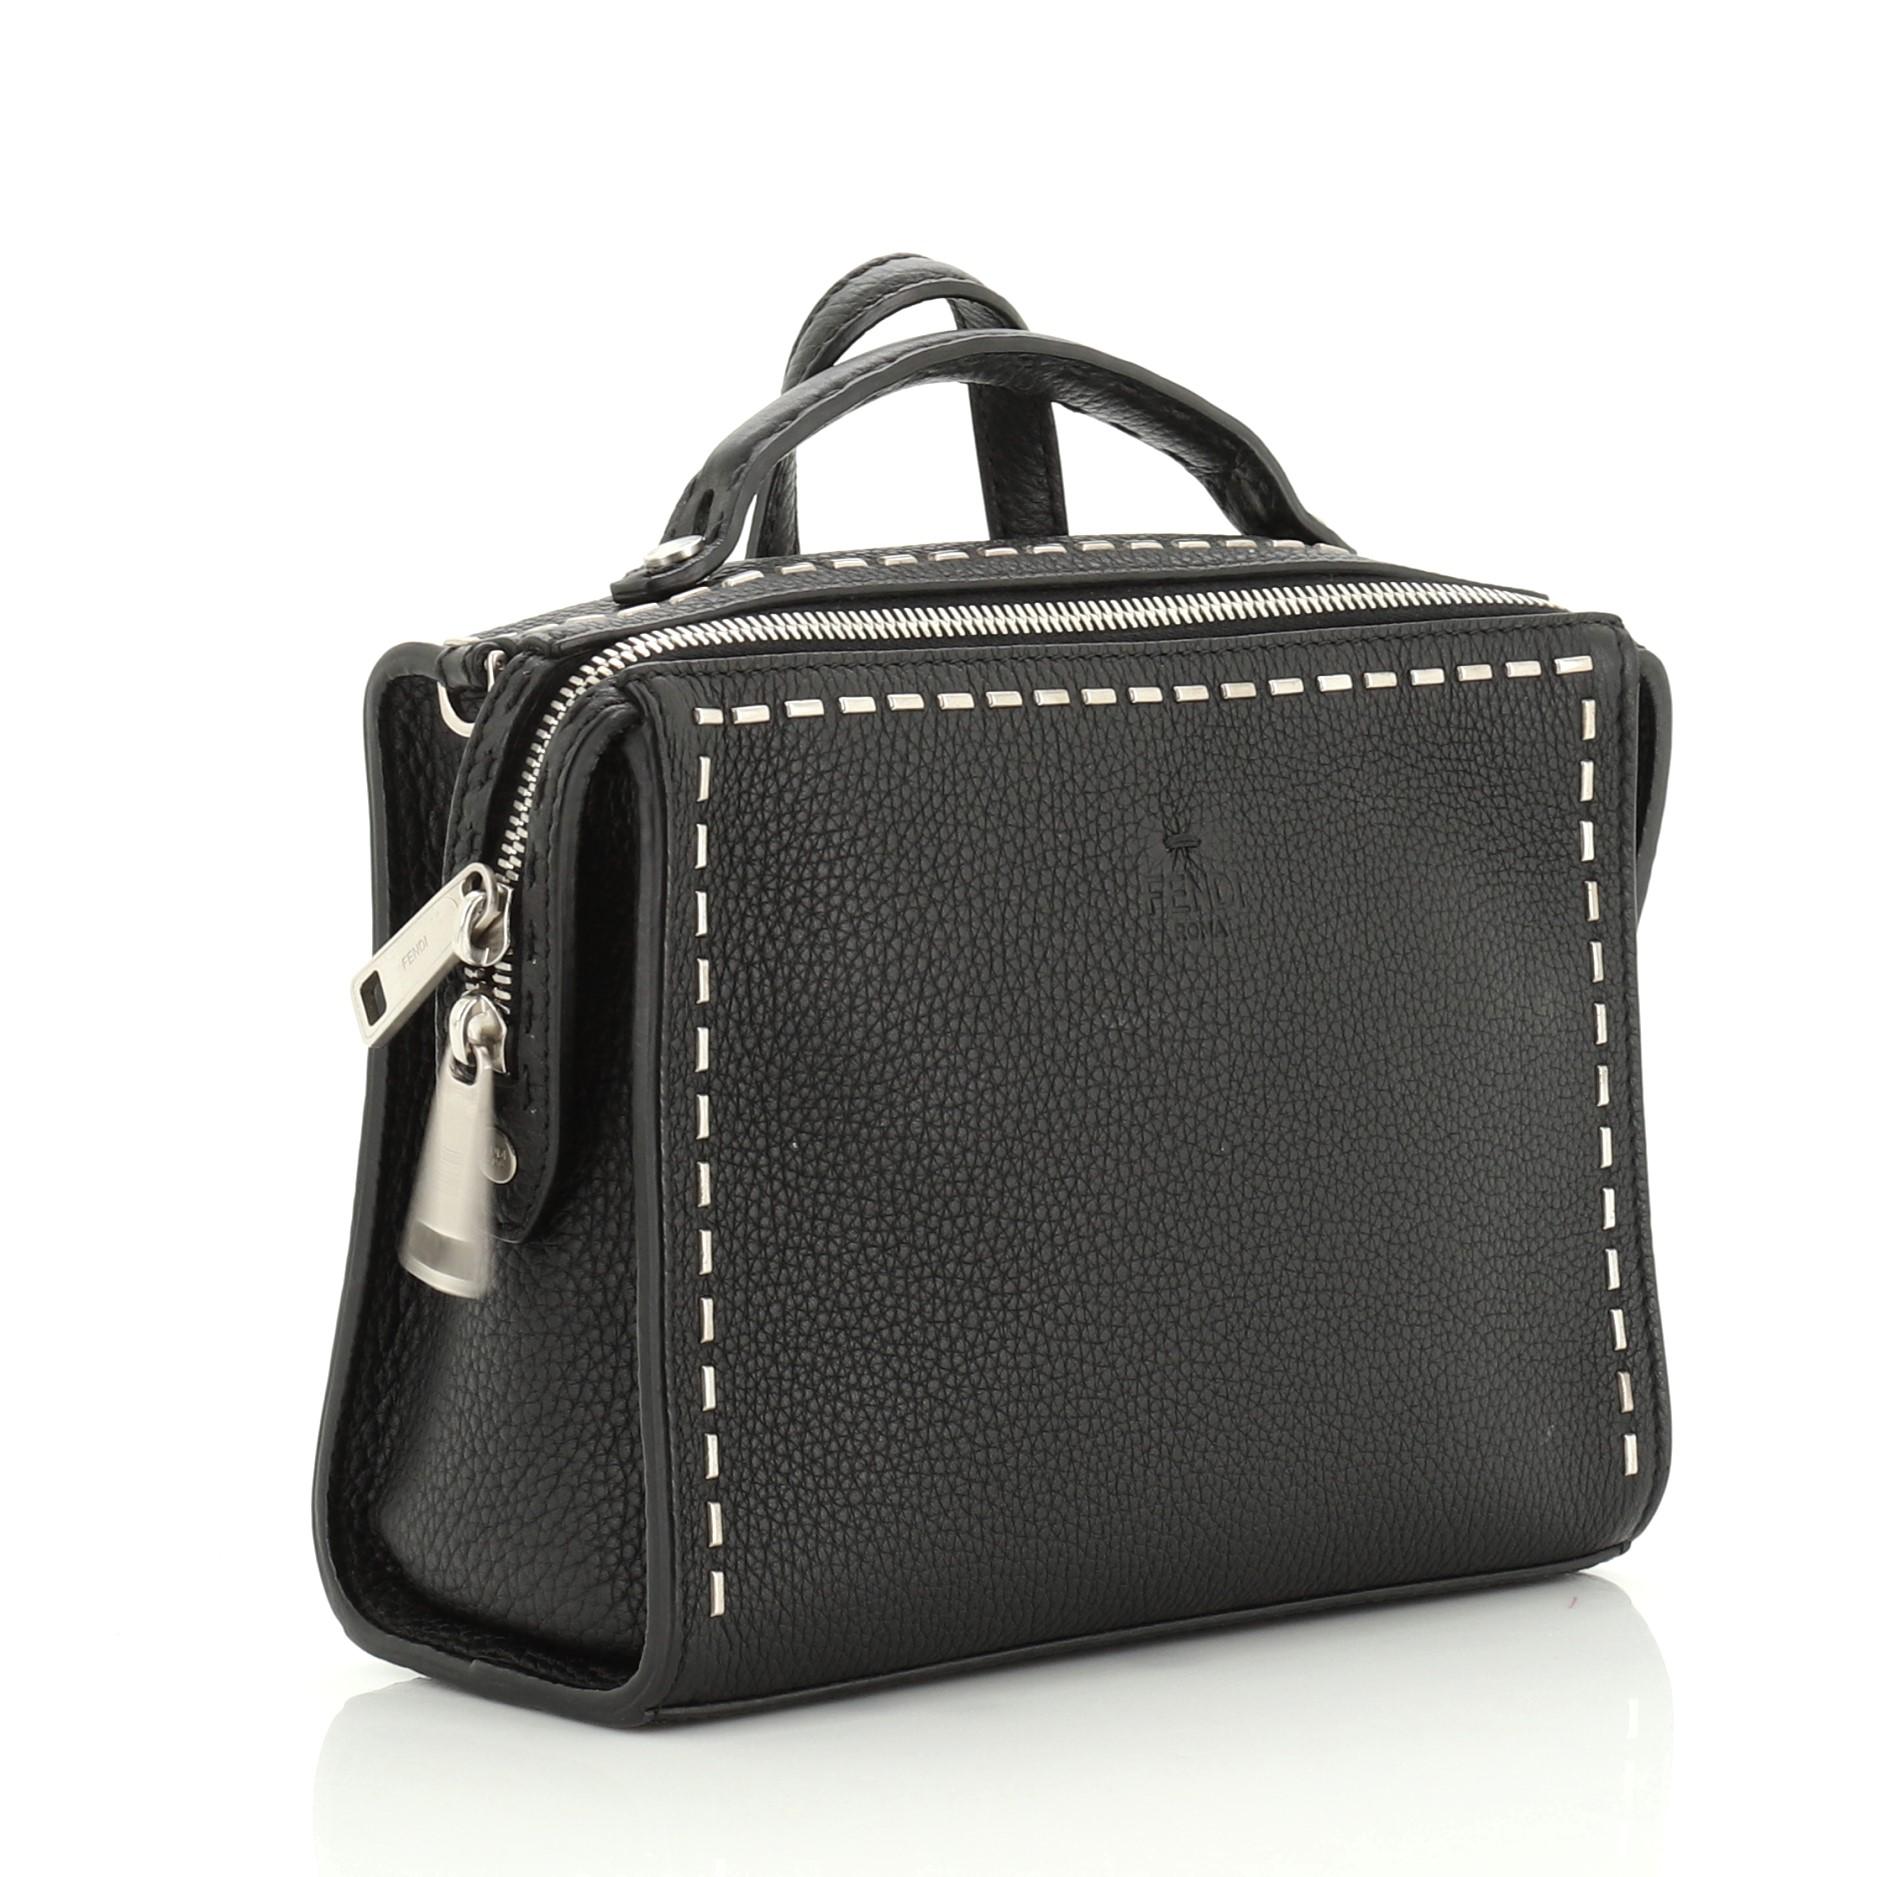 This Fendi Selleria Messenger Bag Studded Leather Mini, crafted in black leather, features a leather top handle, and matte silver-tone hardware. Its zip closure opens to a black fabric interior. These are professional pictures of the actual bag